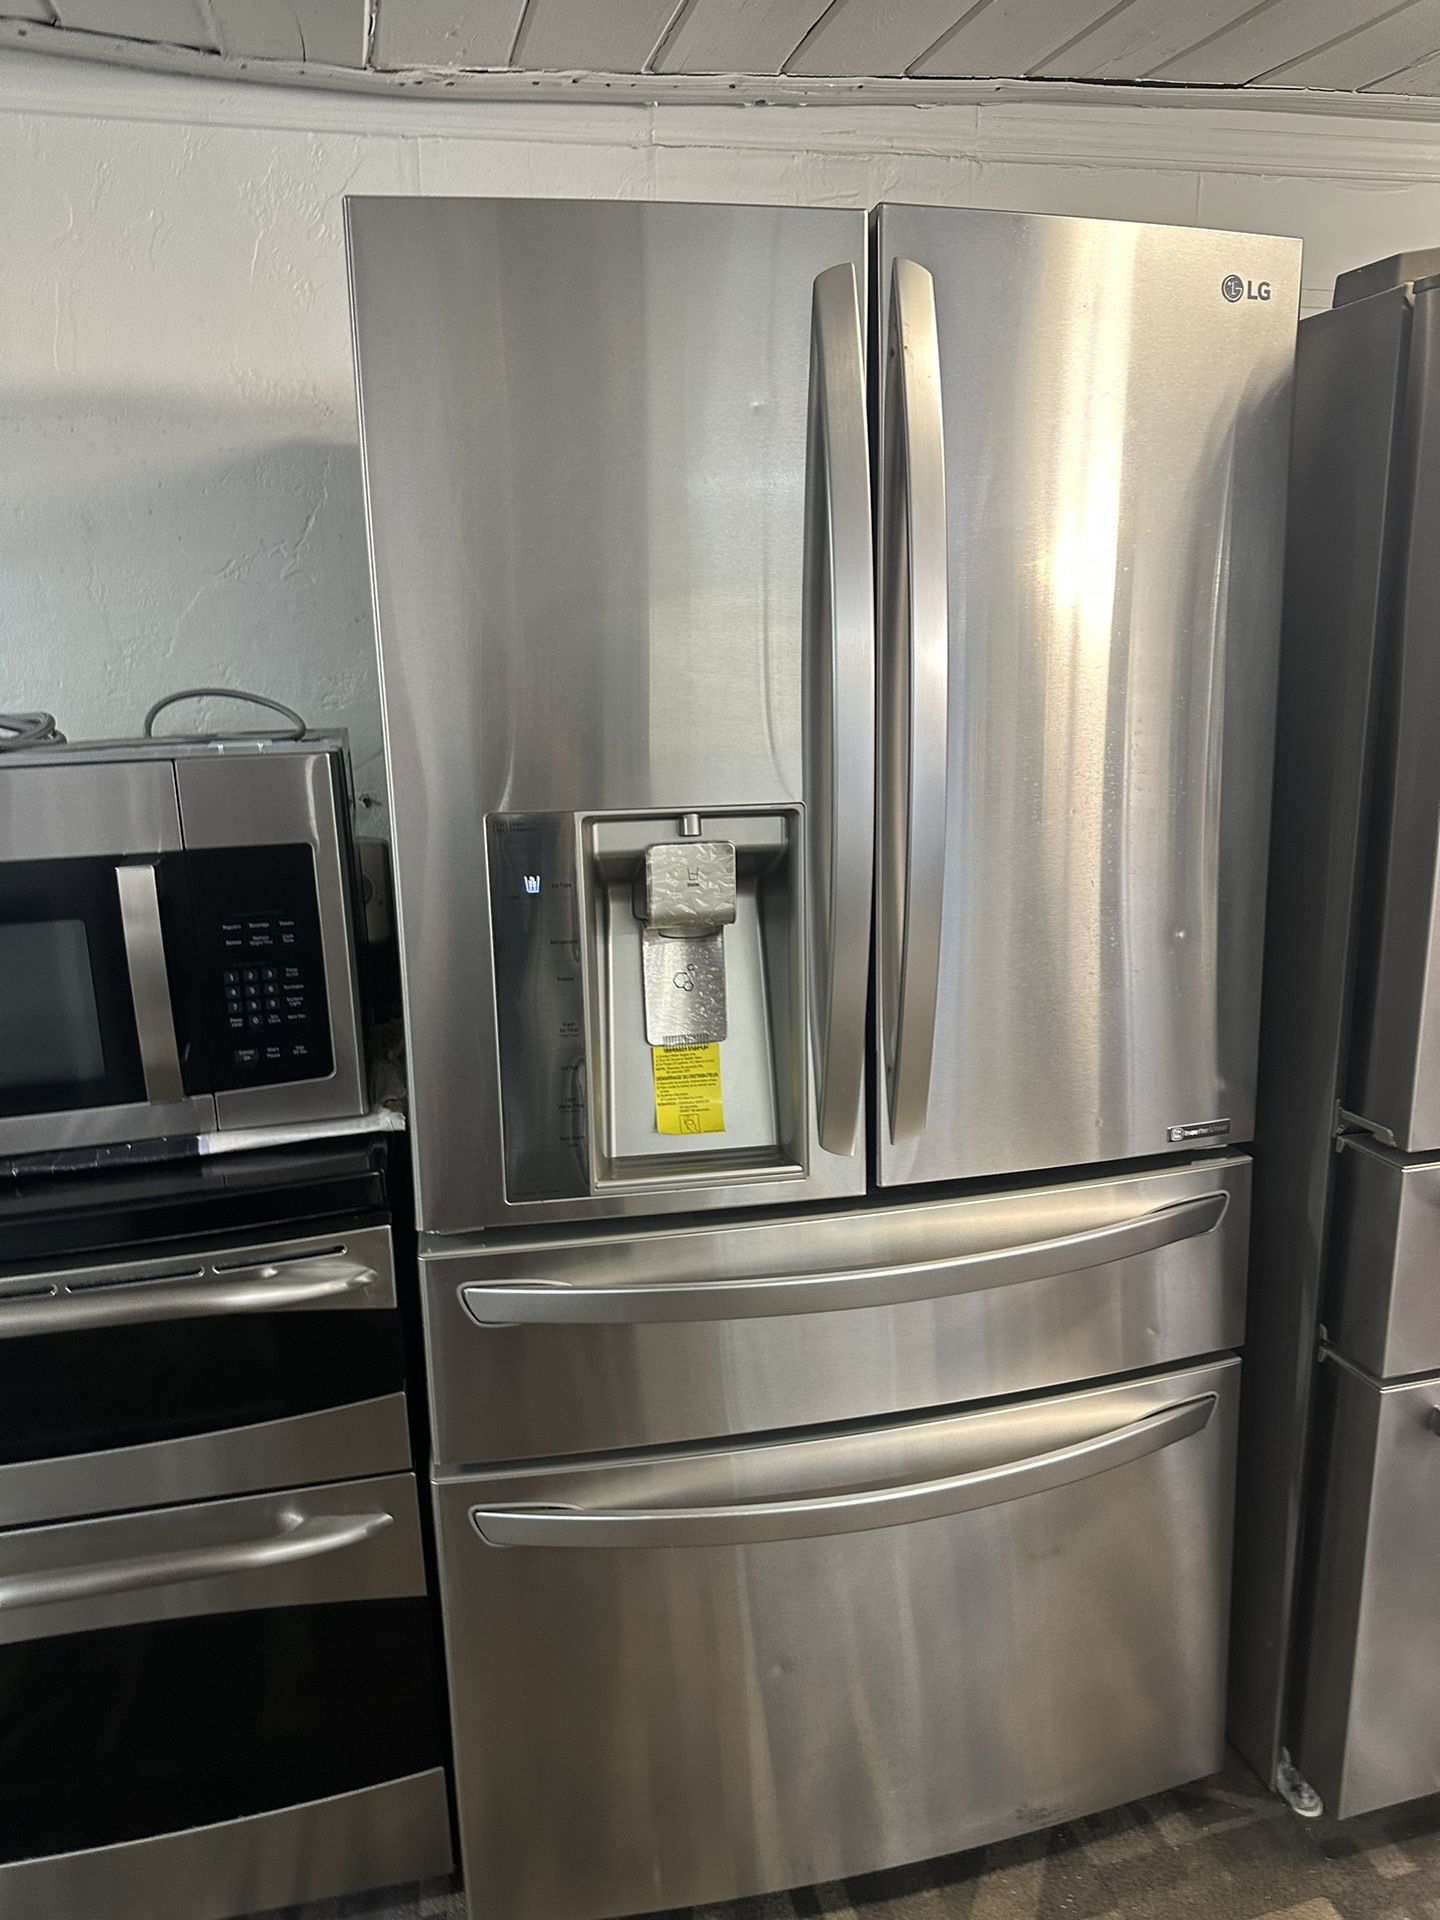 Refrigerator,stove ,dishwasher And Microwave Stainless Steel 